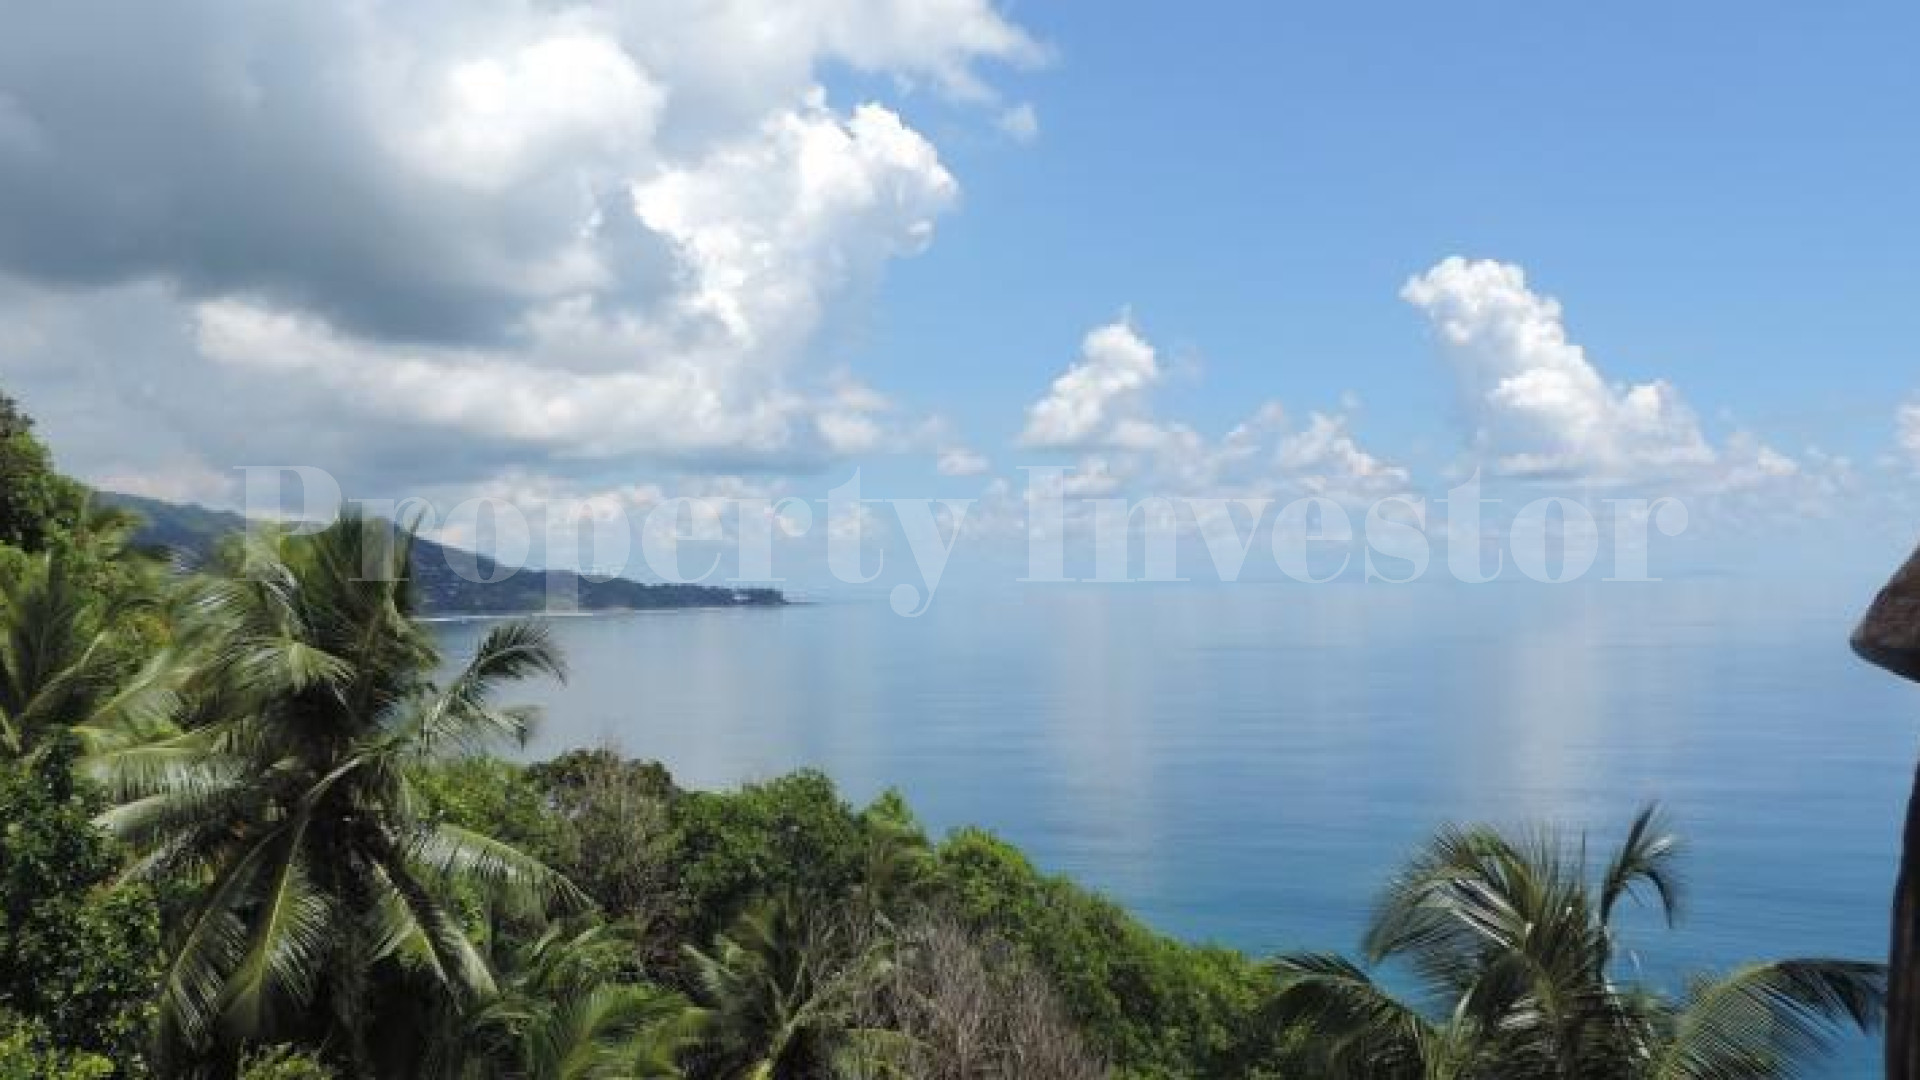 Fantastic 2 Bedroom Luxury Villa with Spectacular Panoramic Sea Views Overlooking Surfer's Beach, Seychelles